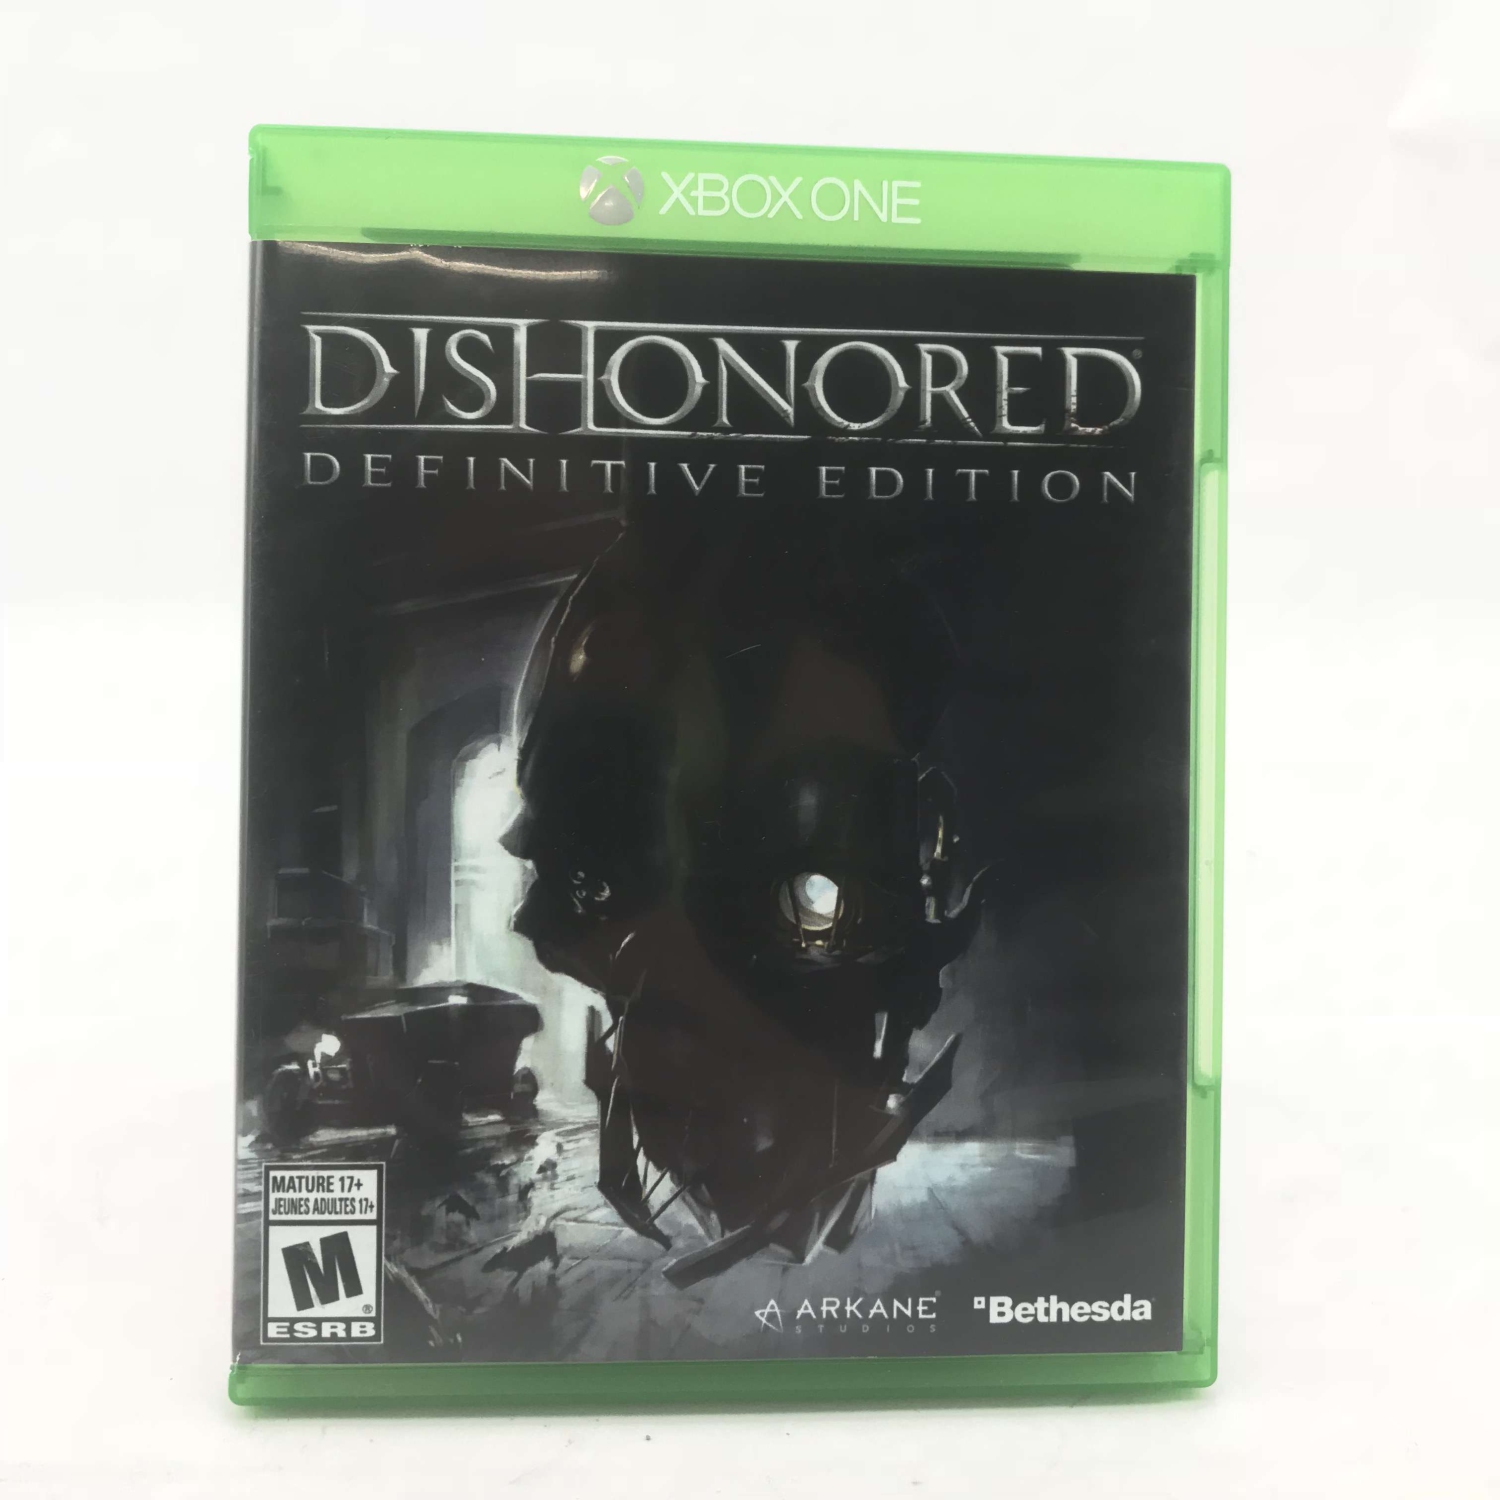 DisHonored: Definitive Edition I Xbox One Video Game I Previously Played